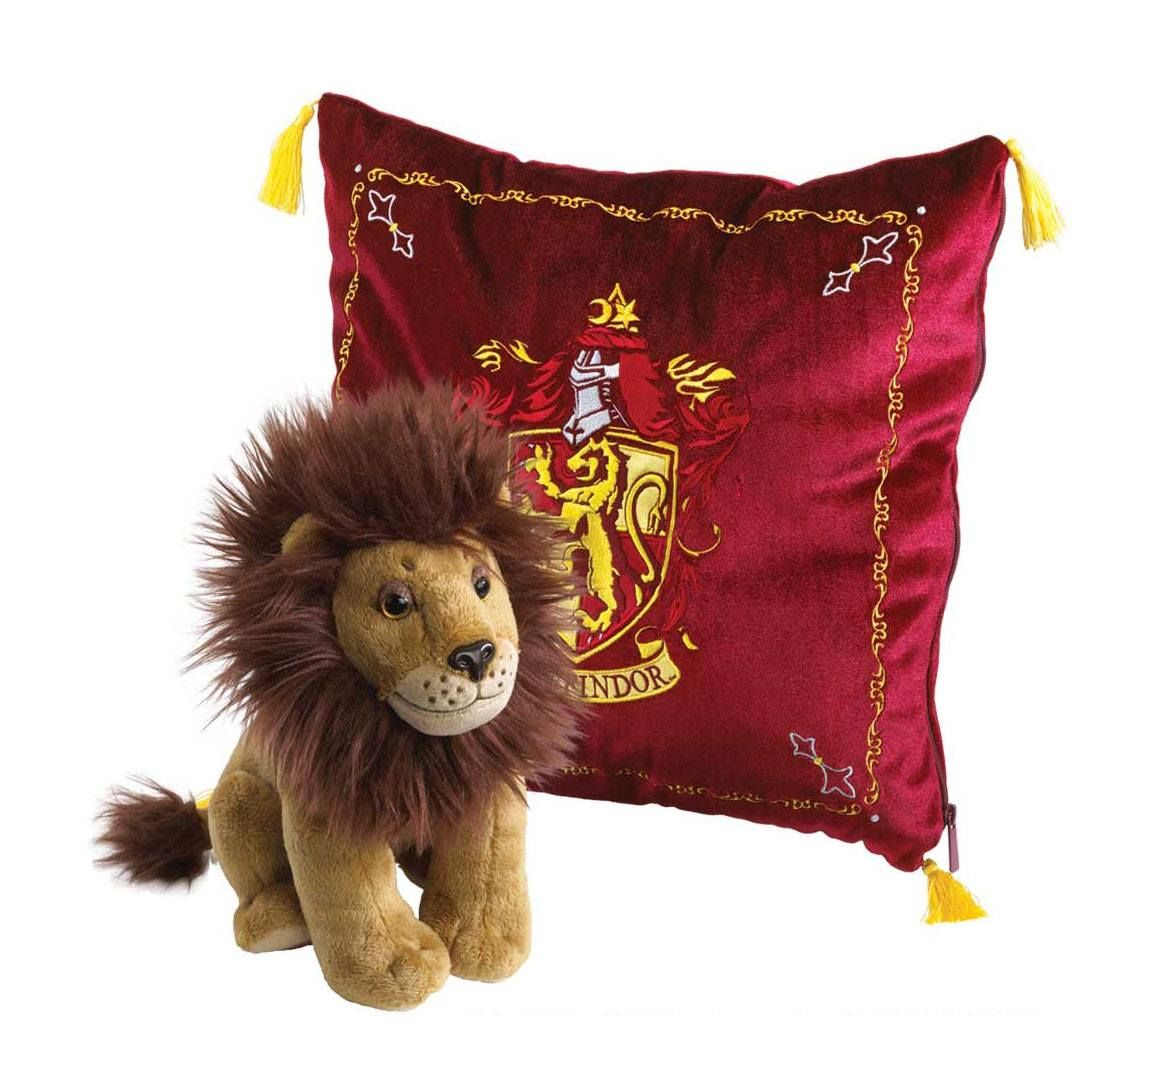 Harry Potter House Mascot Cushion with Plush Figure Gryffindor Noble Collection